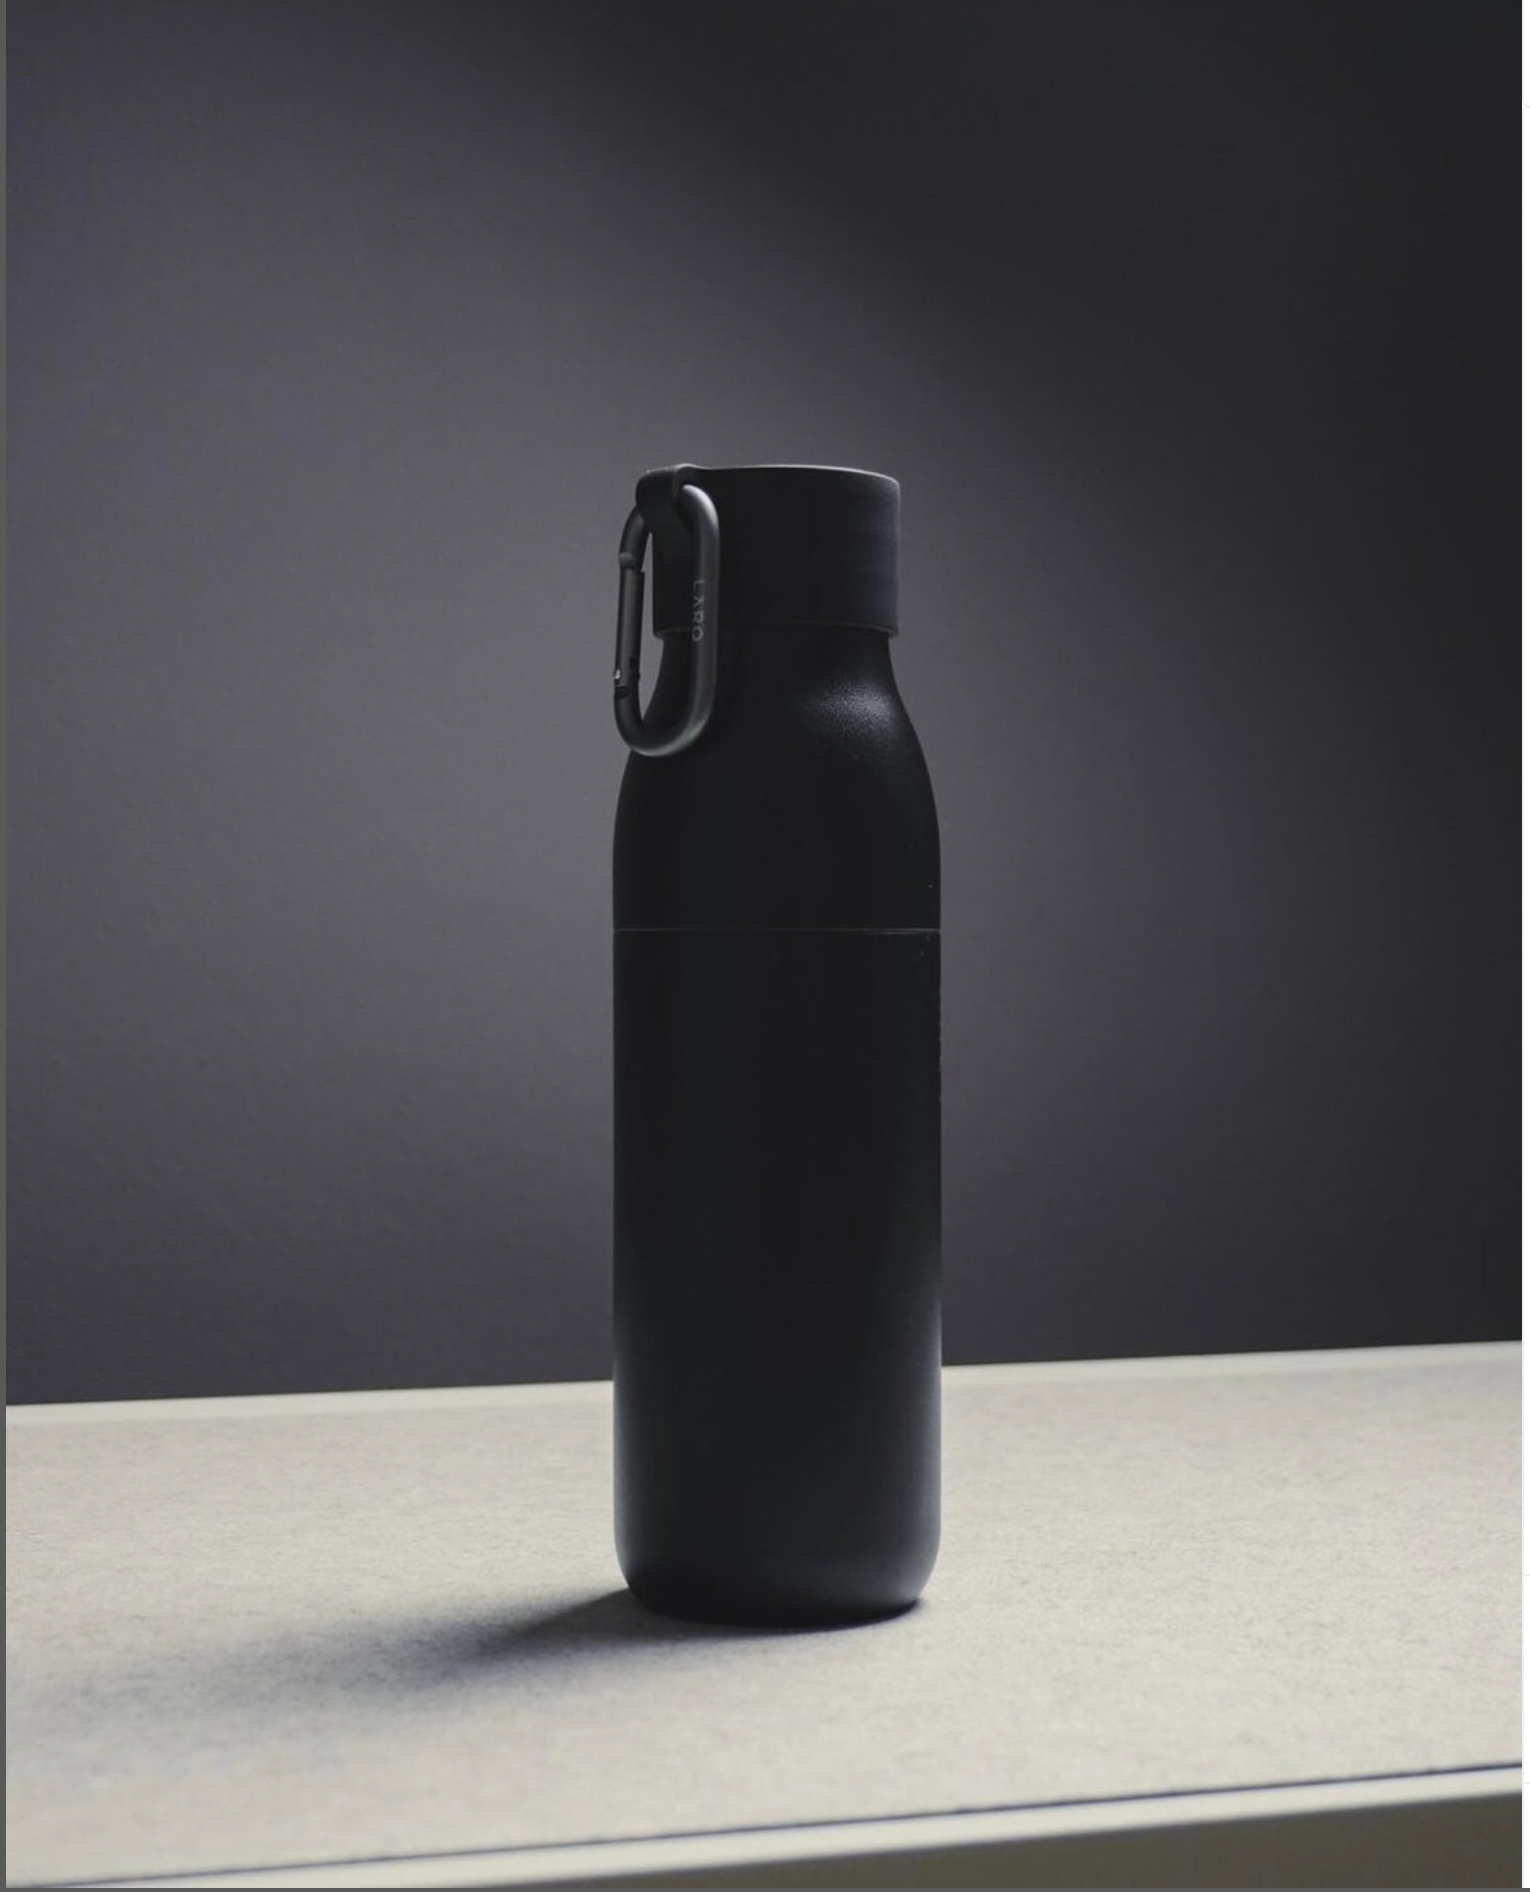 Black insulated water bottle with a carabiner attached to its lid, positioned on a table against a gray background.